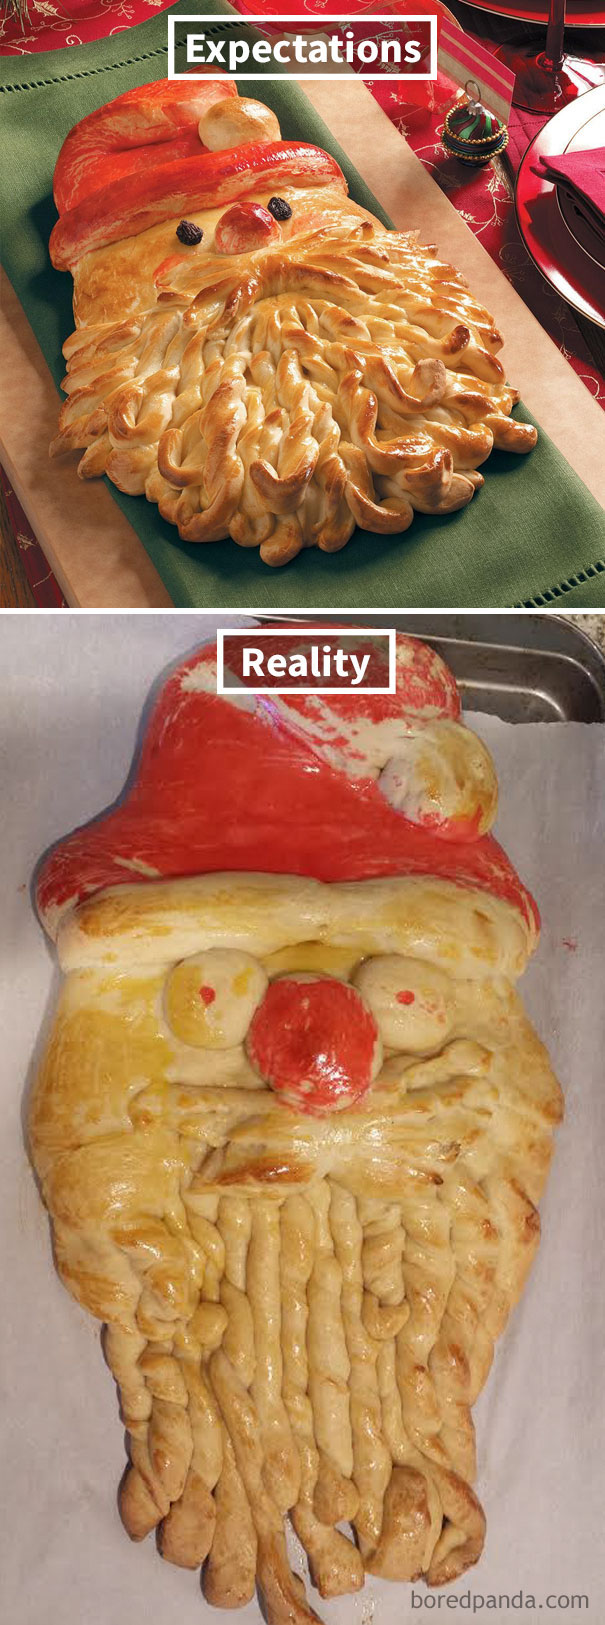 I Made A Santa Shaped Bread From A Recipe I Found, It Turned Out A Bit Different From The Picture